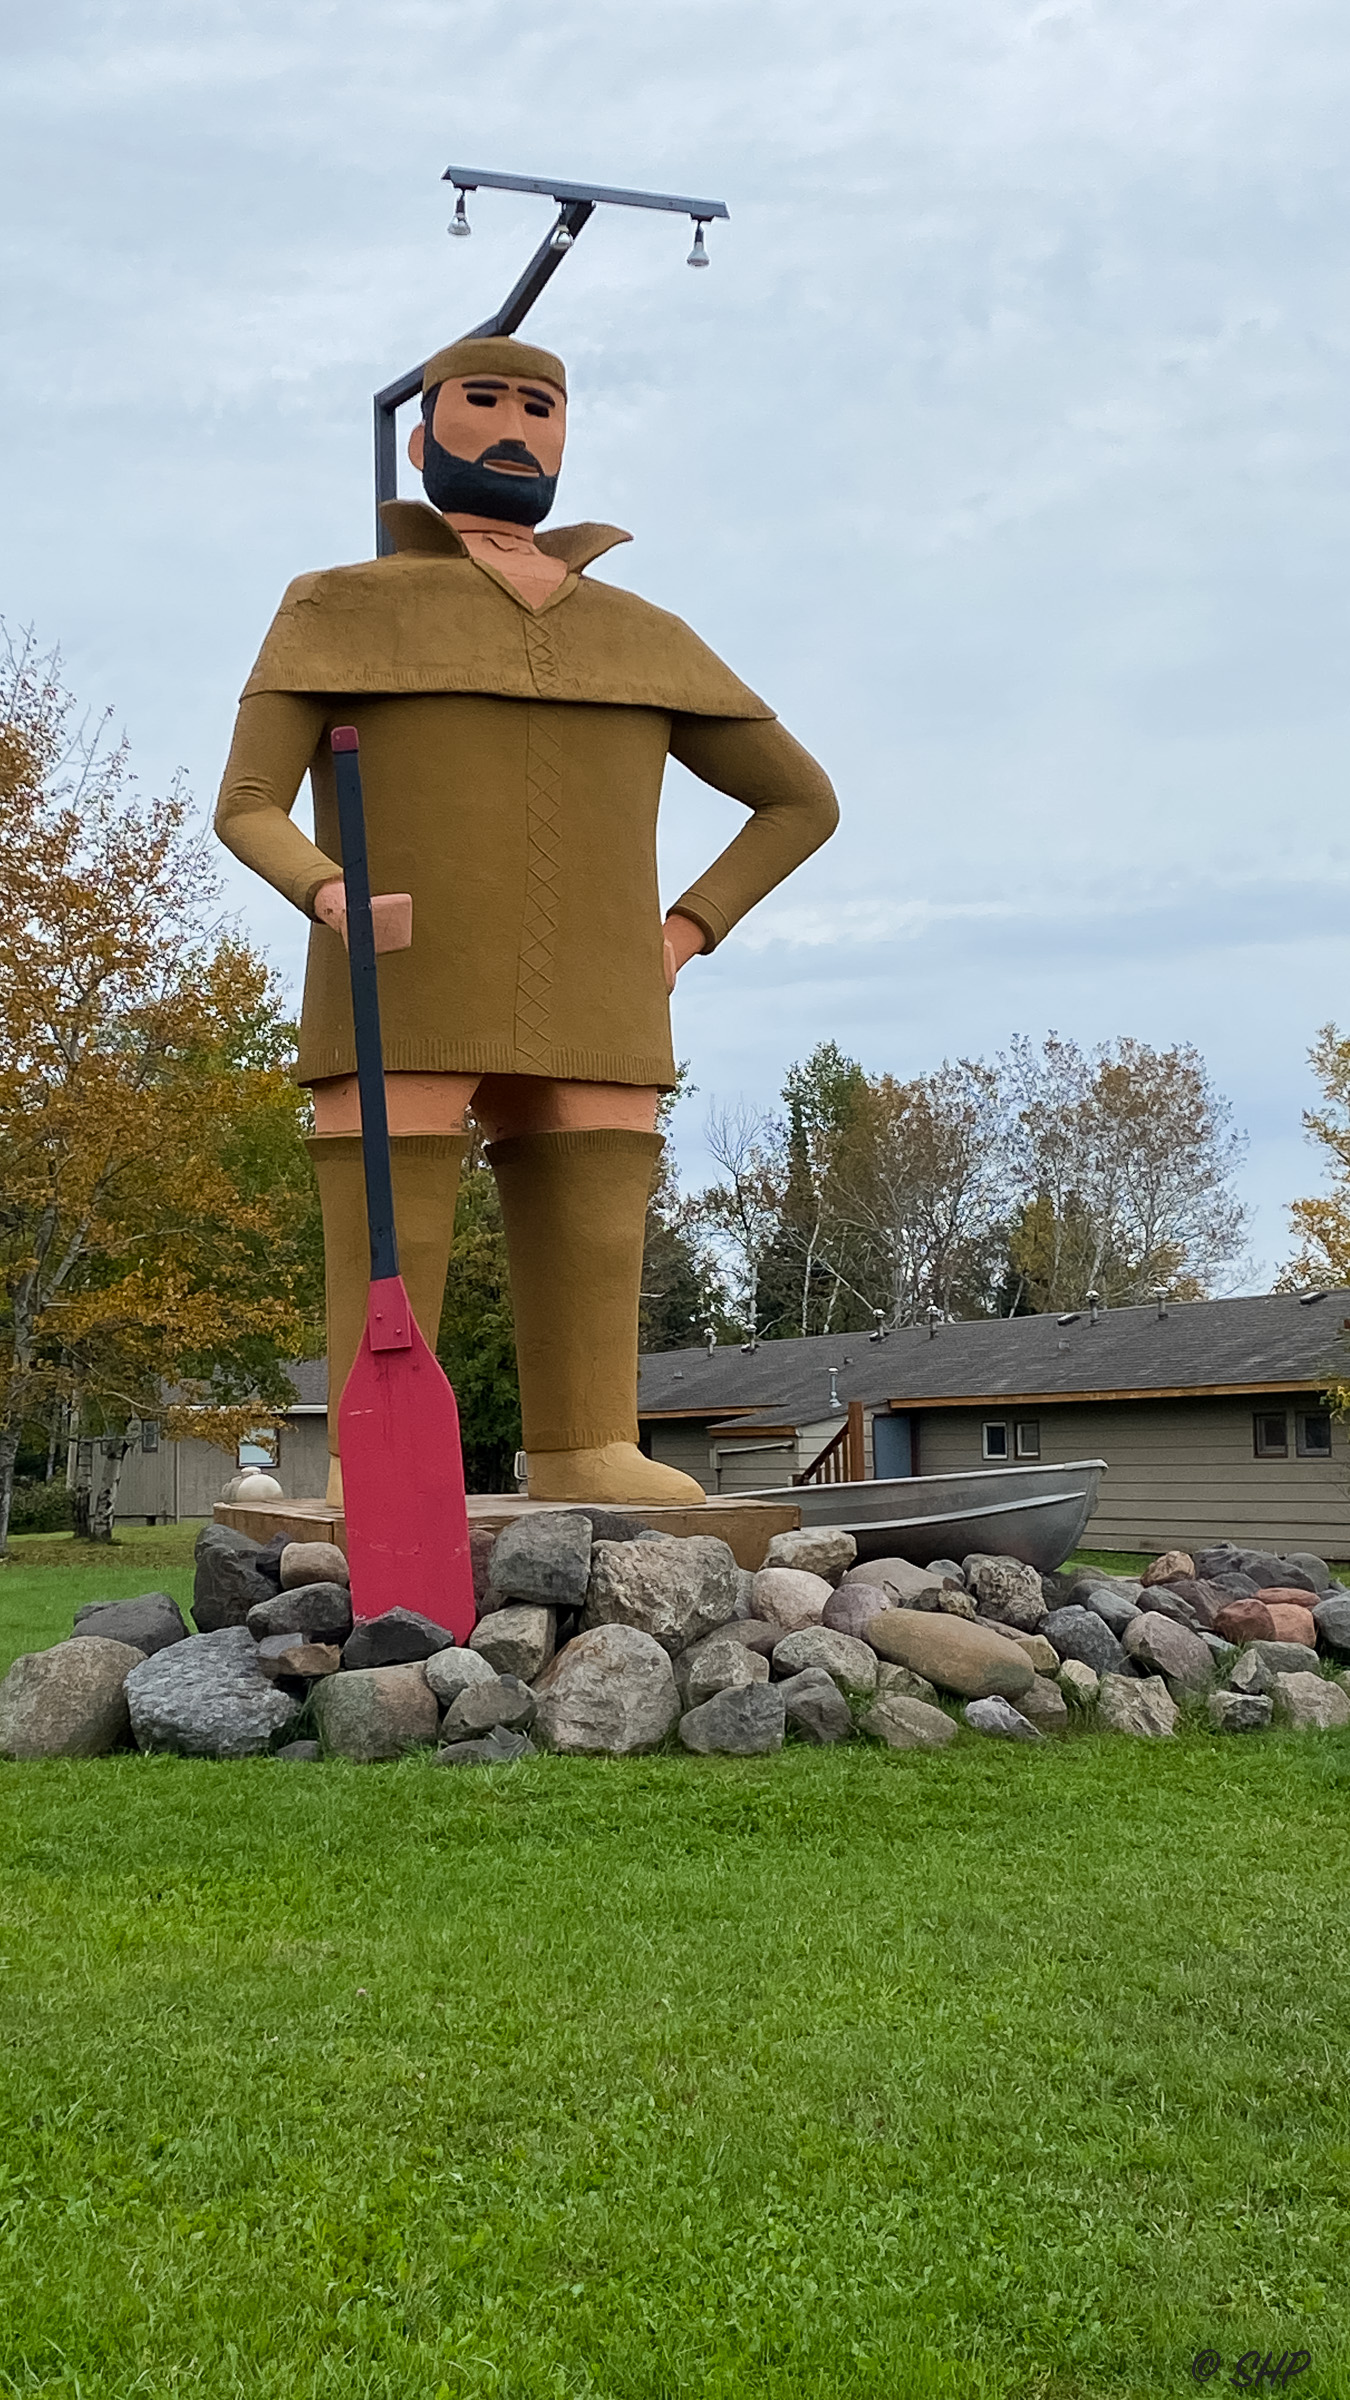 Pierre the Pantless statue in MN